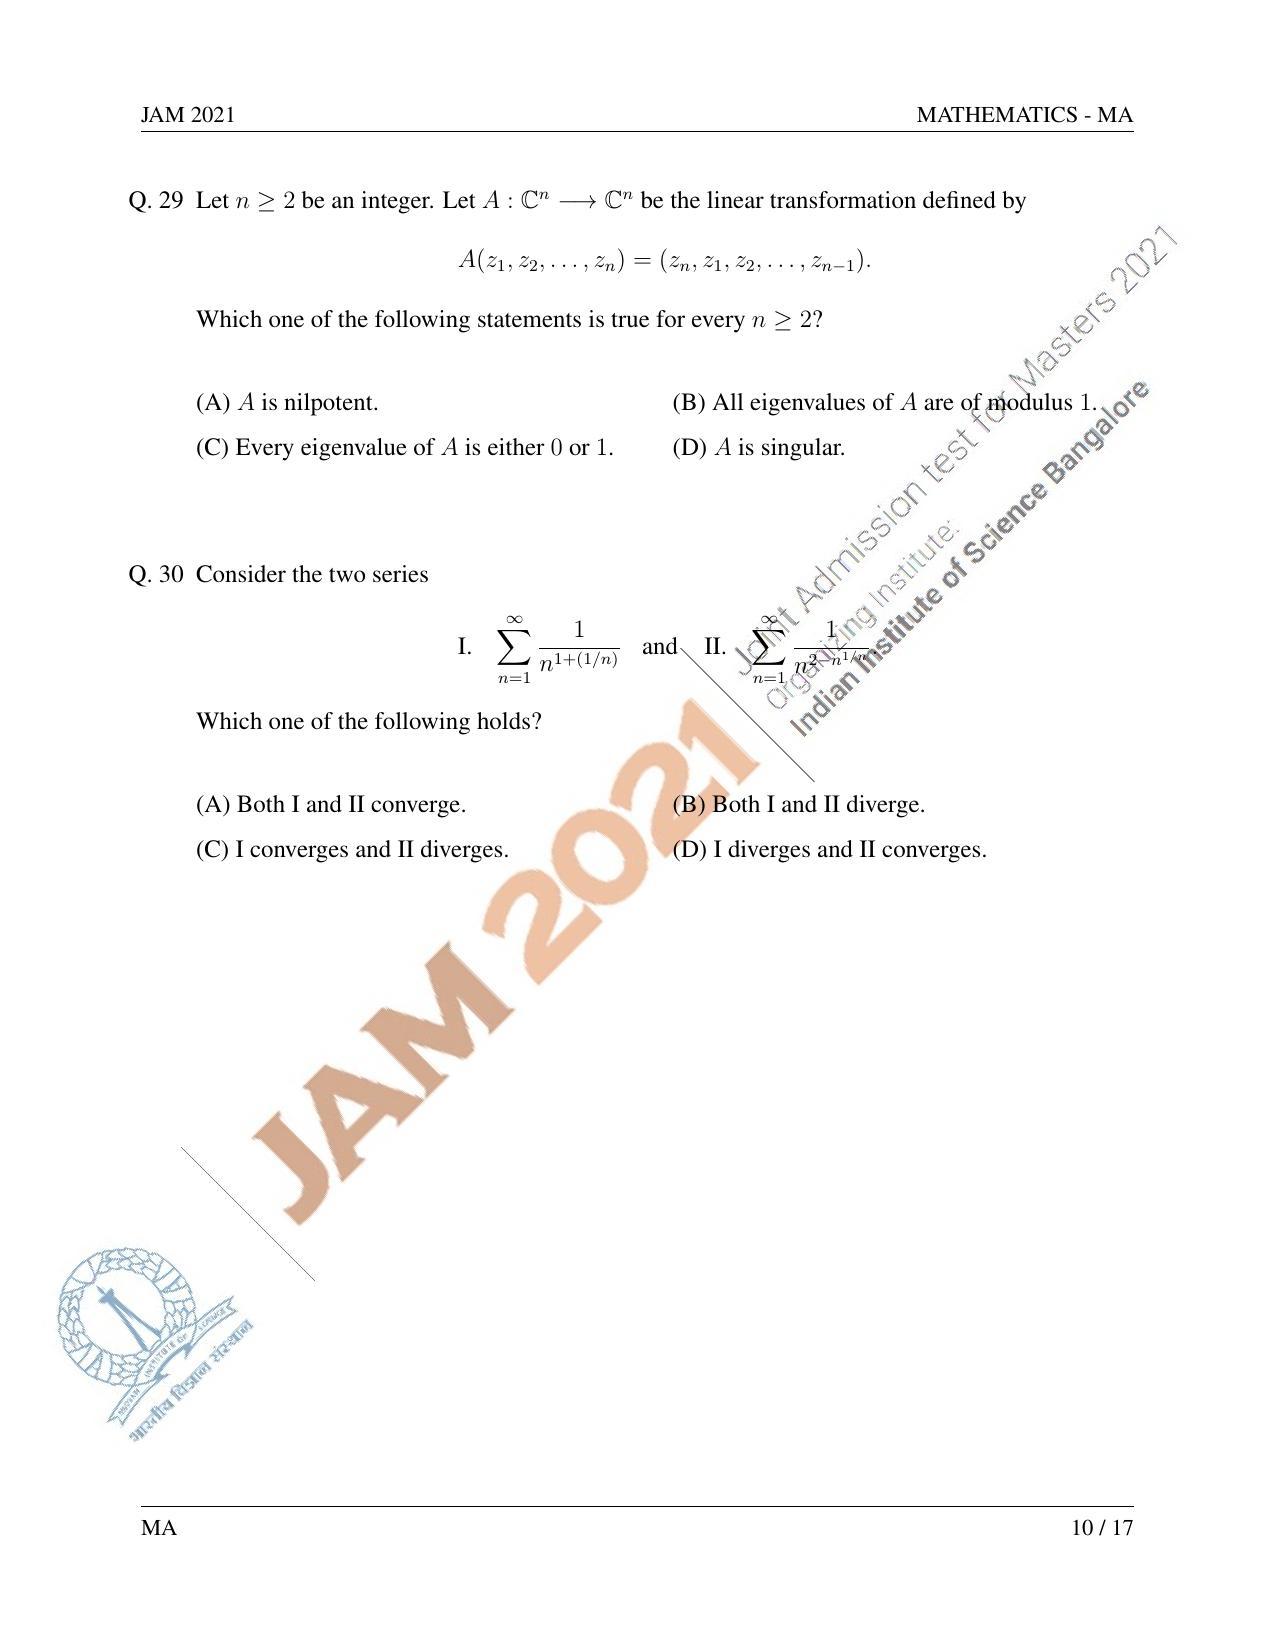 JAM 2021: MA Question Paper - Page 11